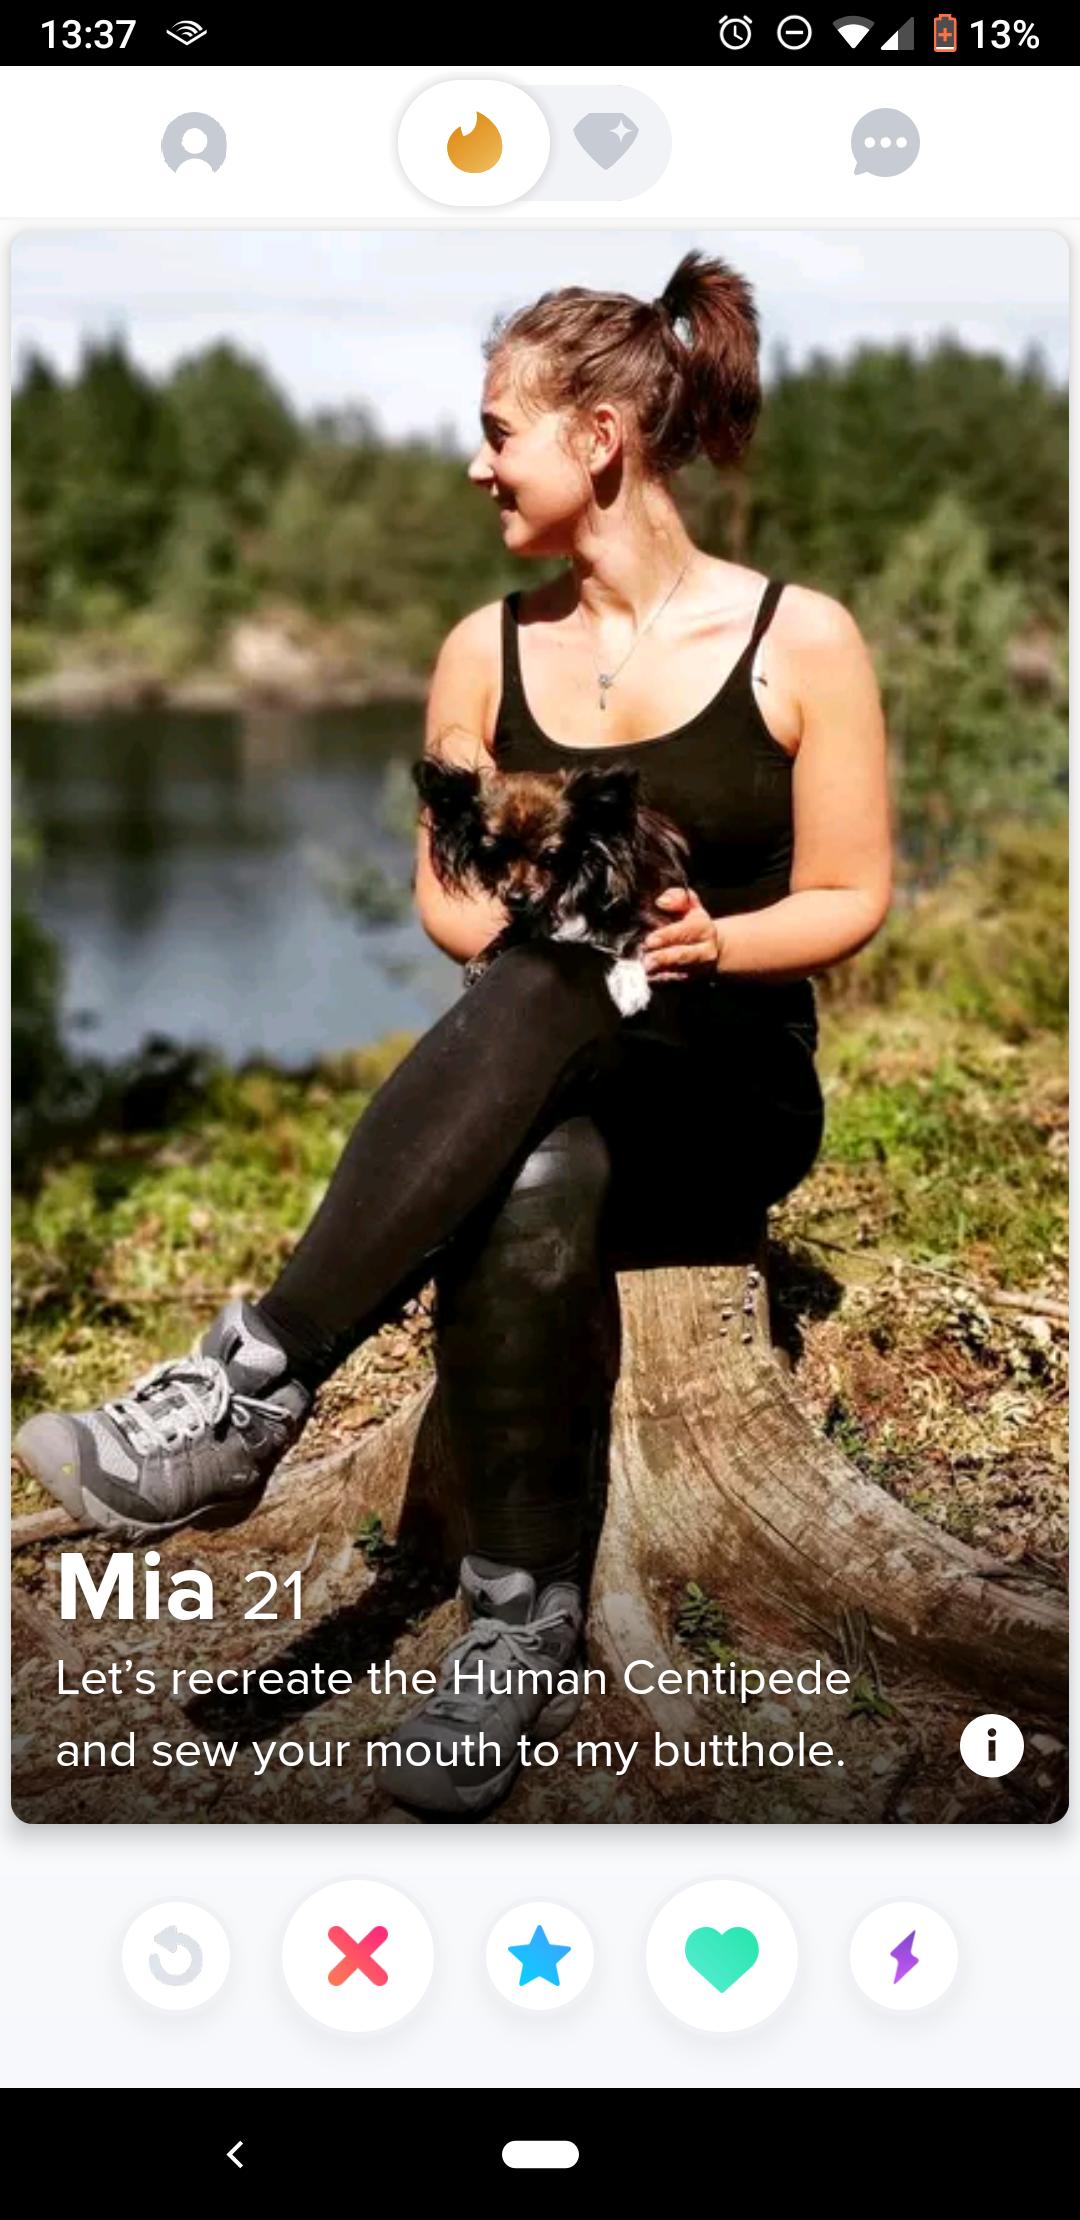 tinder - photograph - 0 0 2 13% Mia 21 Let's recreate the Human Centipede and sew your mouth to my butthole.